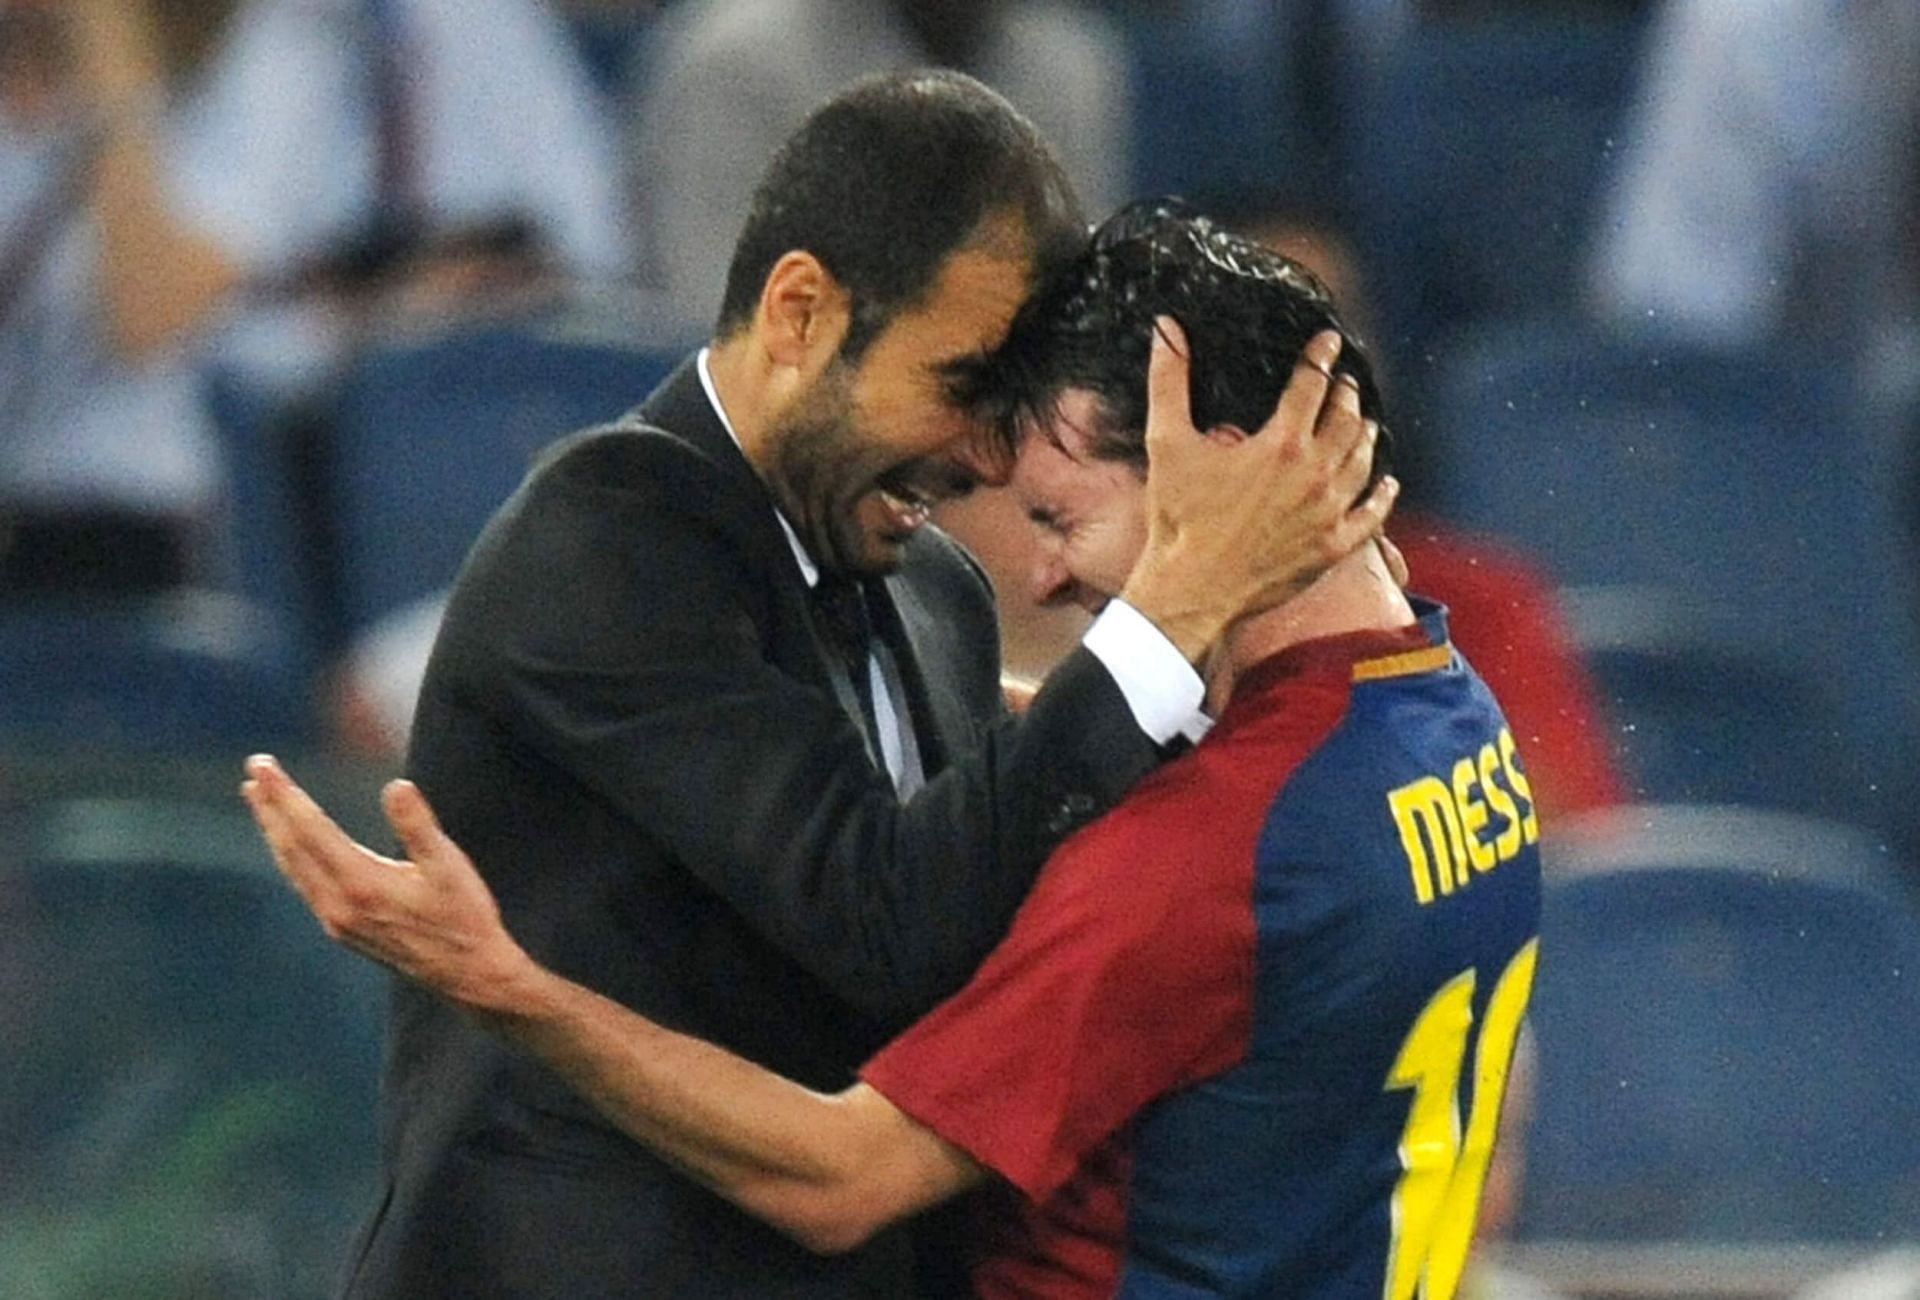 Guardiola wanted to protect Messi (right).